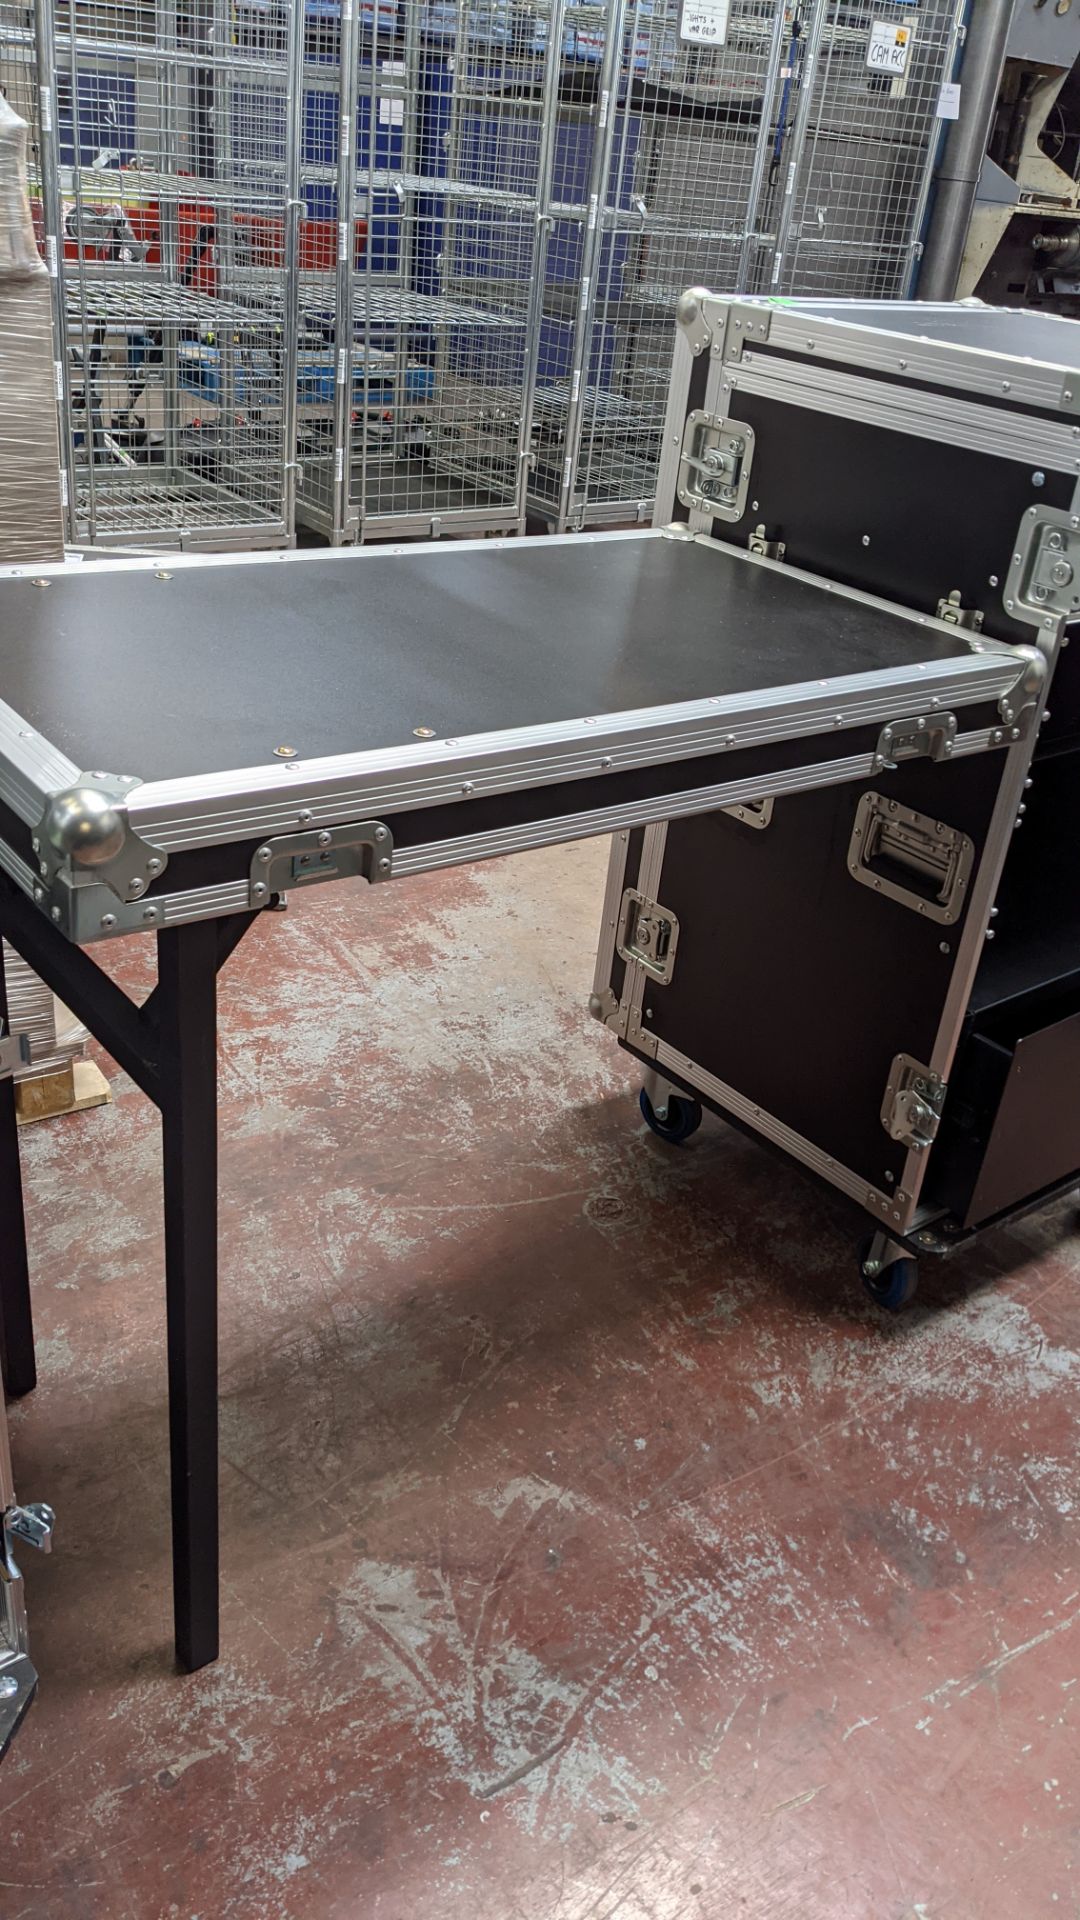 Spider 19inch rack case comprising 15U mobile rack with front & rear covers that turn into optional - Image 15 of 17